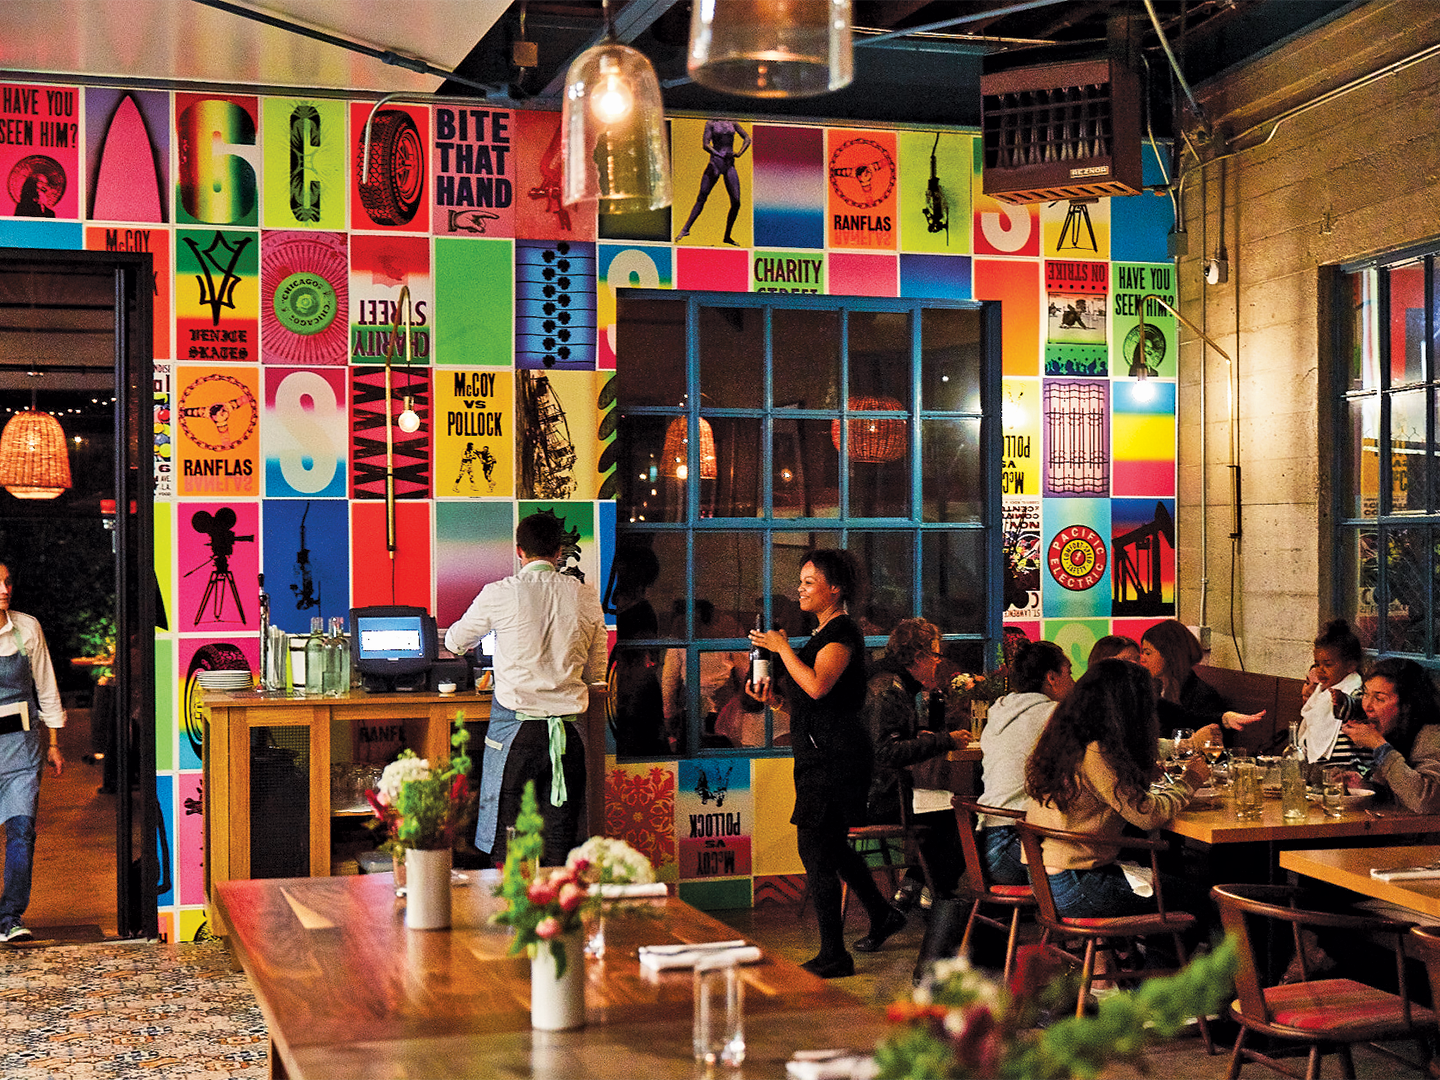 A busy restaurant scene with brightly colored wall paper that has a grid layout with neon tiles with either big letters or graphic images.